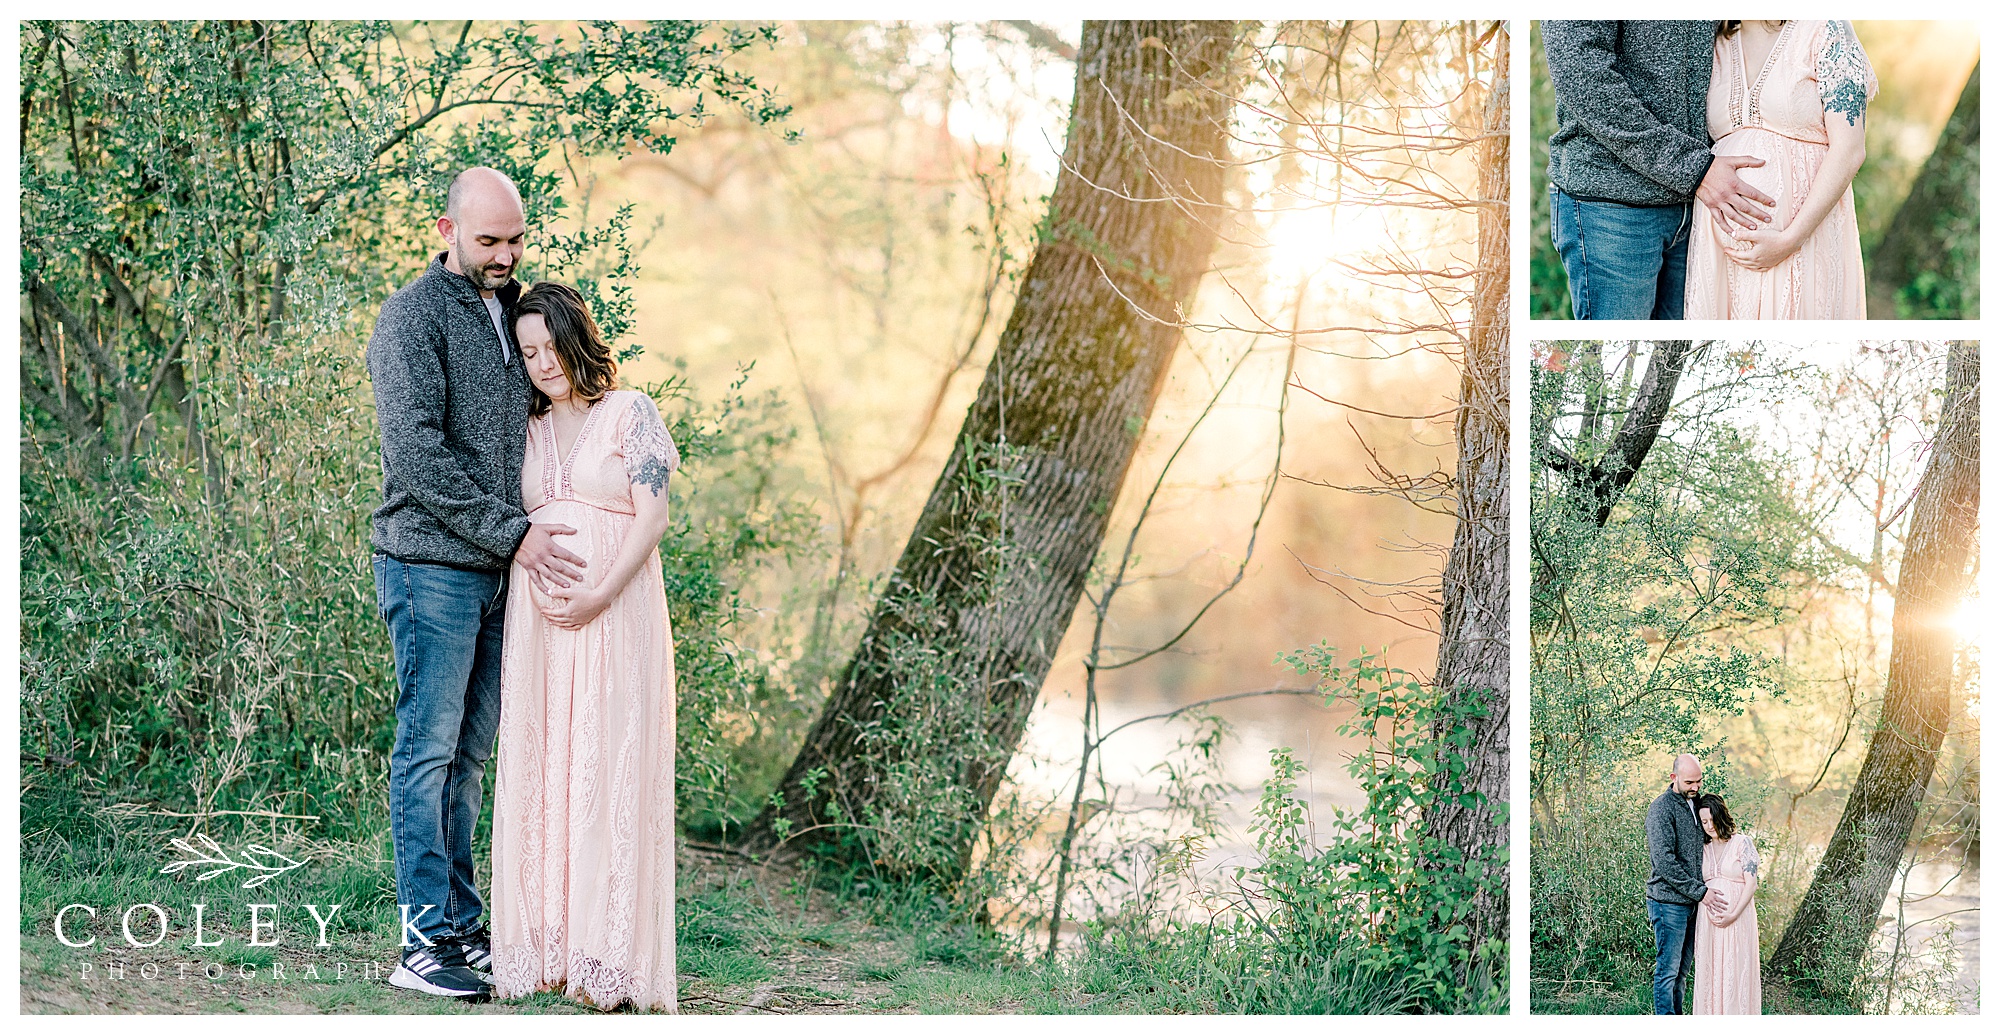 Maternity photography with sunlight by river